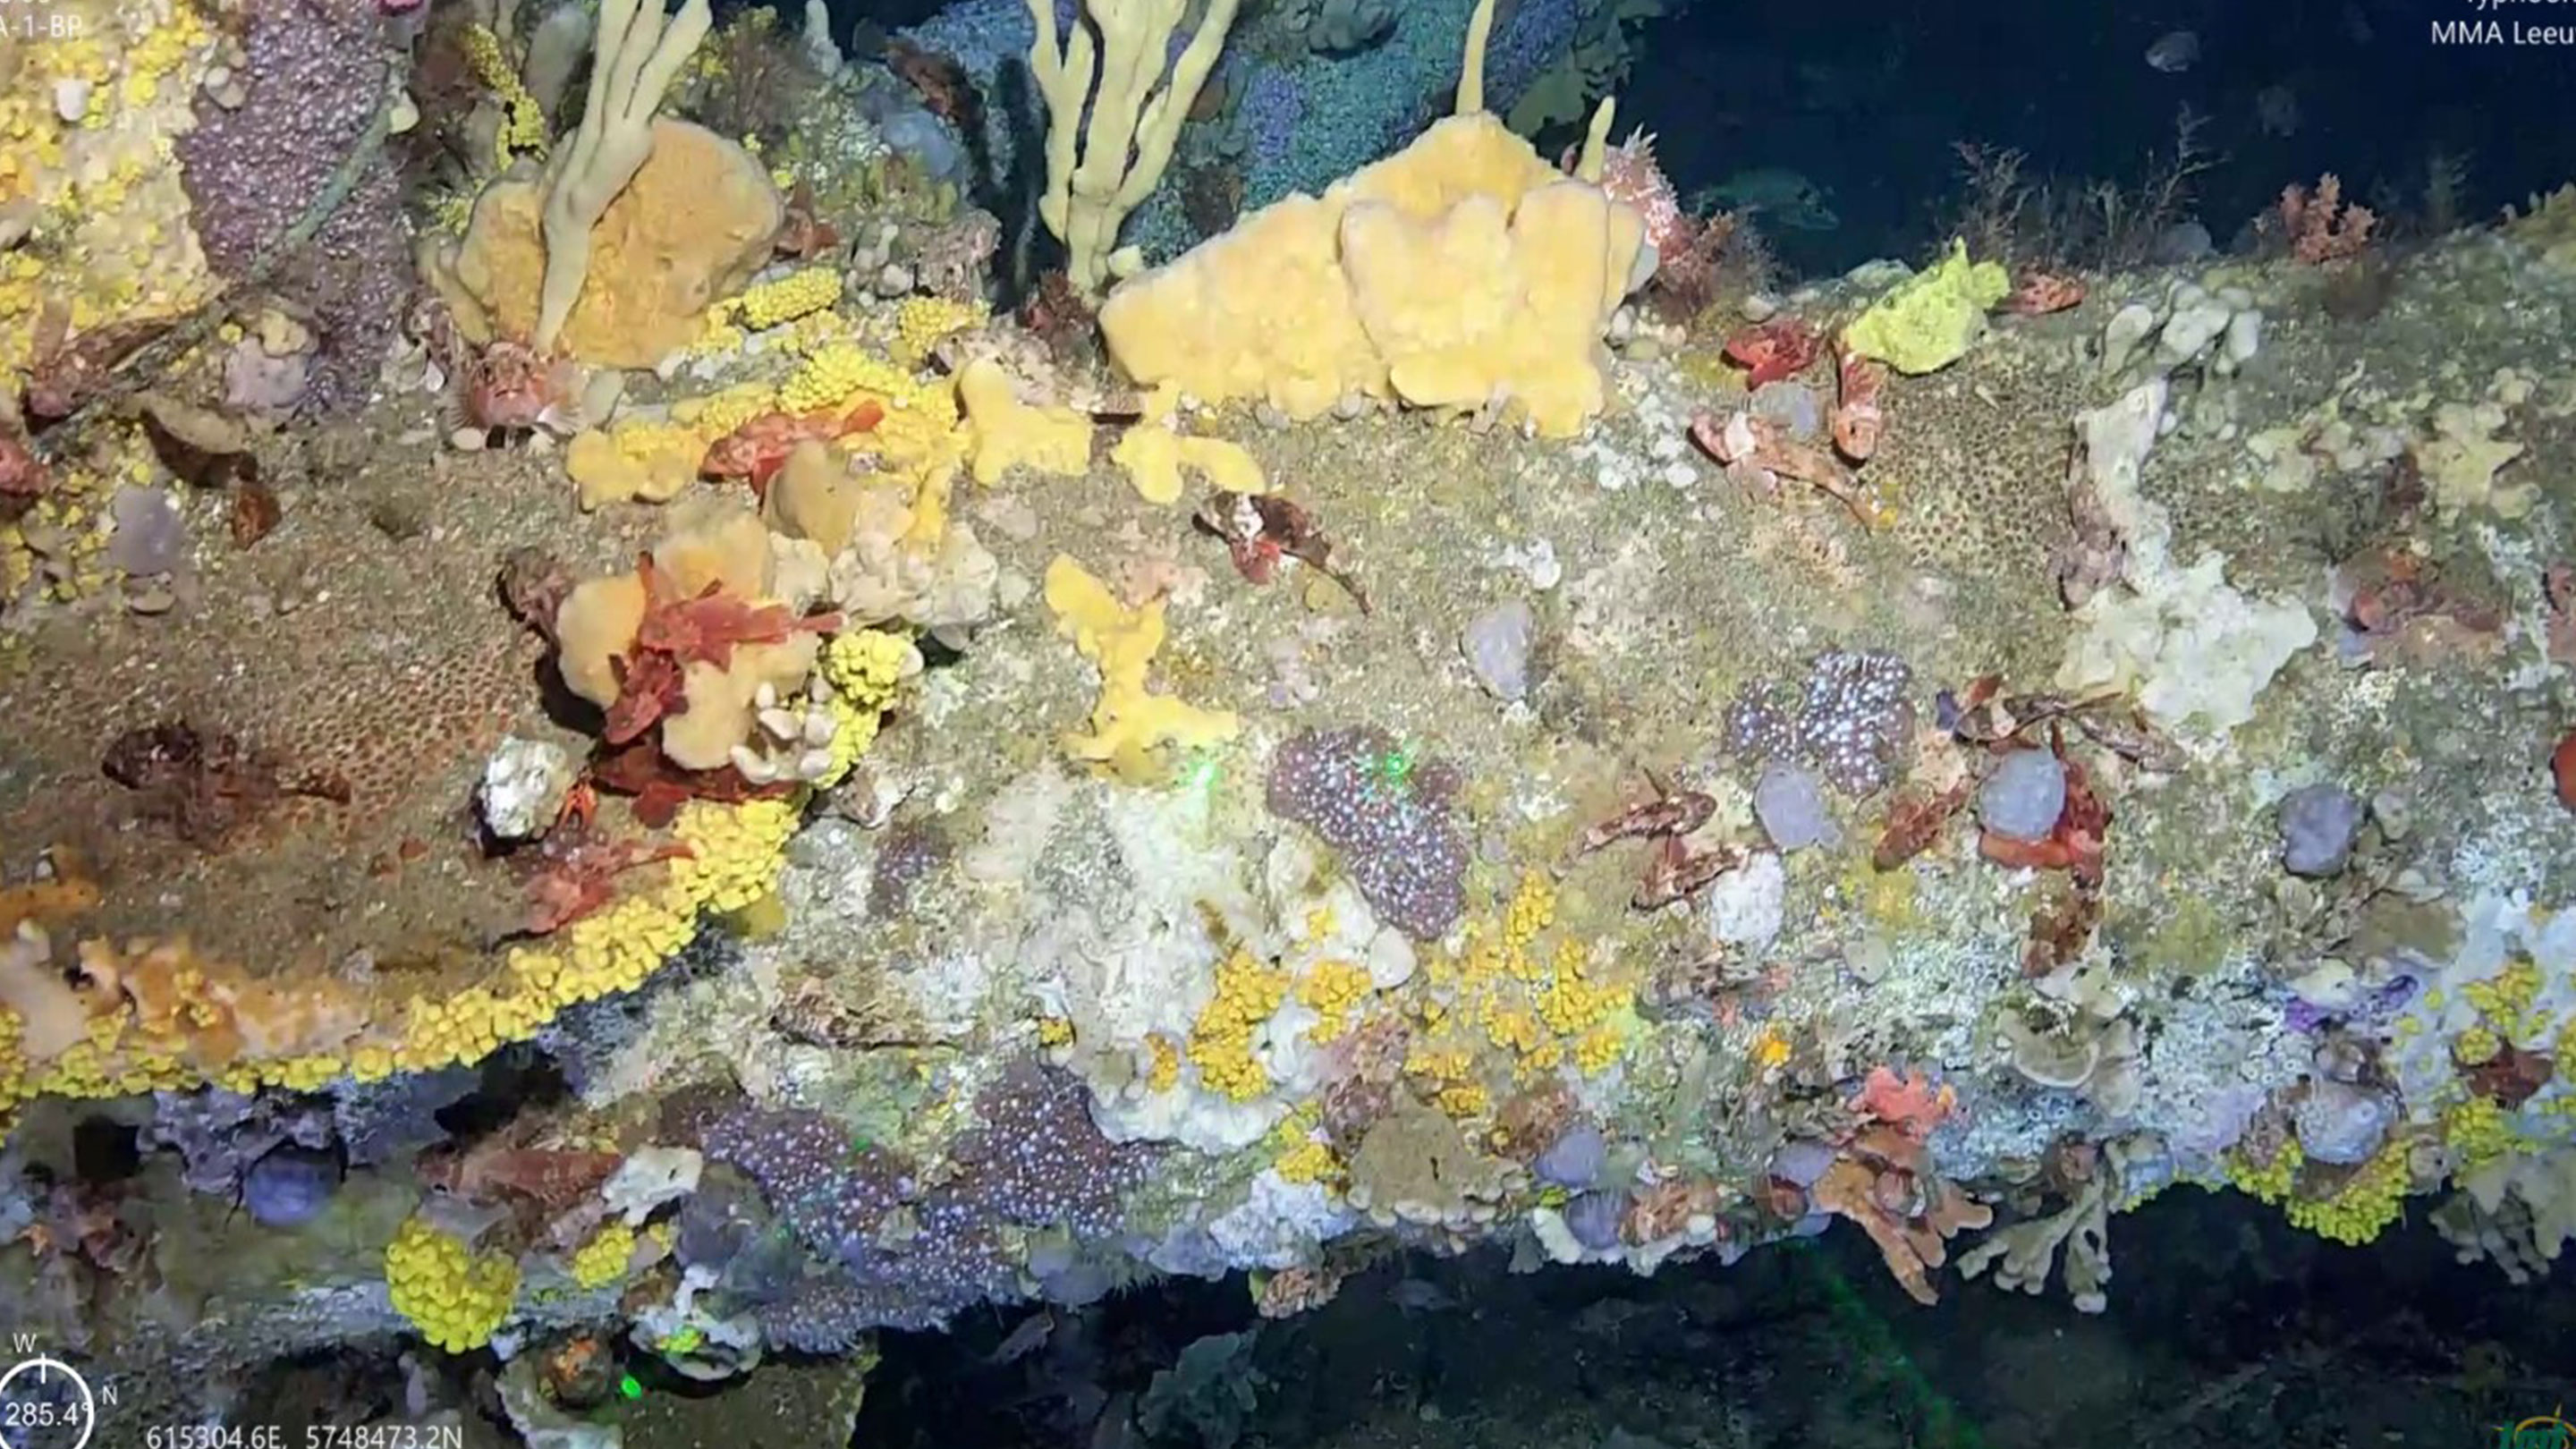 Image Flora and fauna observed 70 metres deep under the offshore platform Halibut, captured by a remotely operated vehicle (ROV).